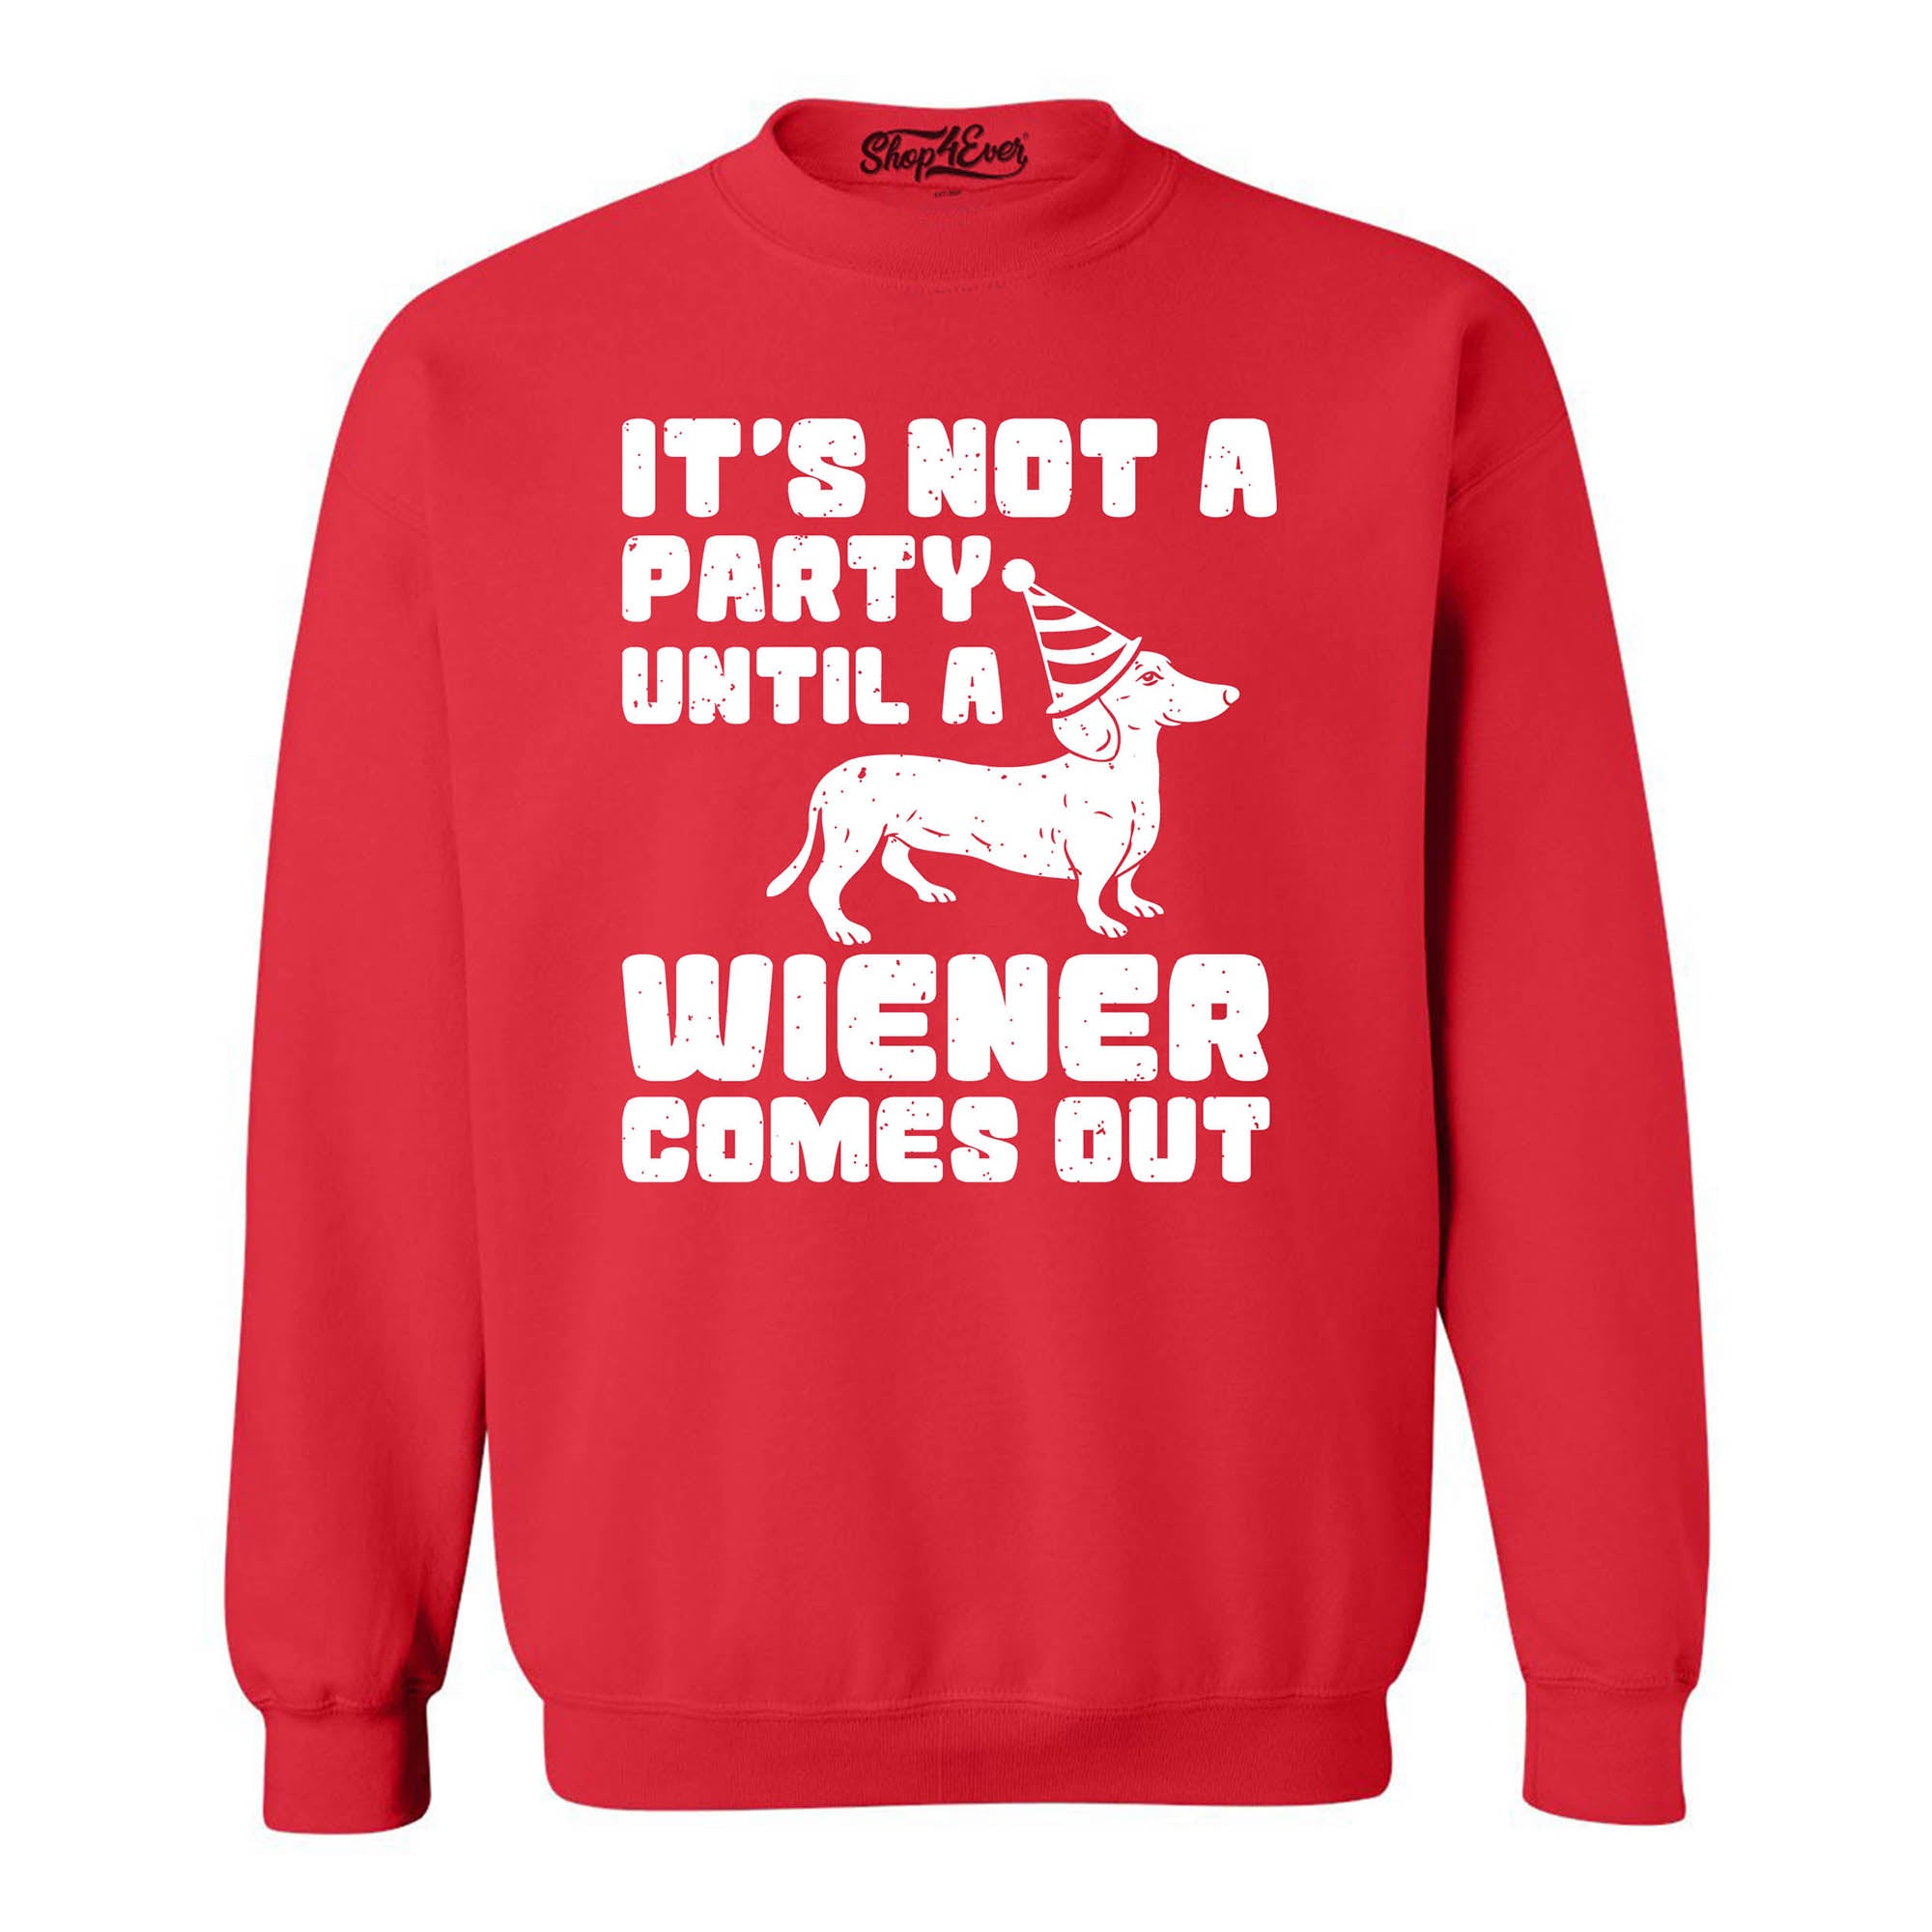 It's Not a Party Until the Wiener Comes Out Funny Dachshund Crewneck Sweatshirts